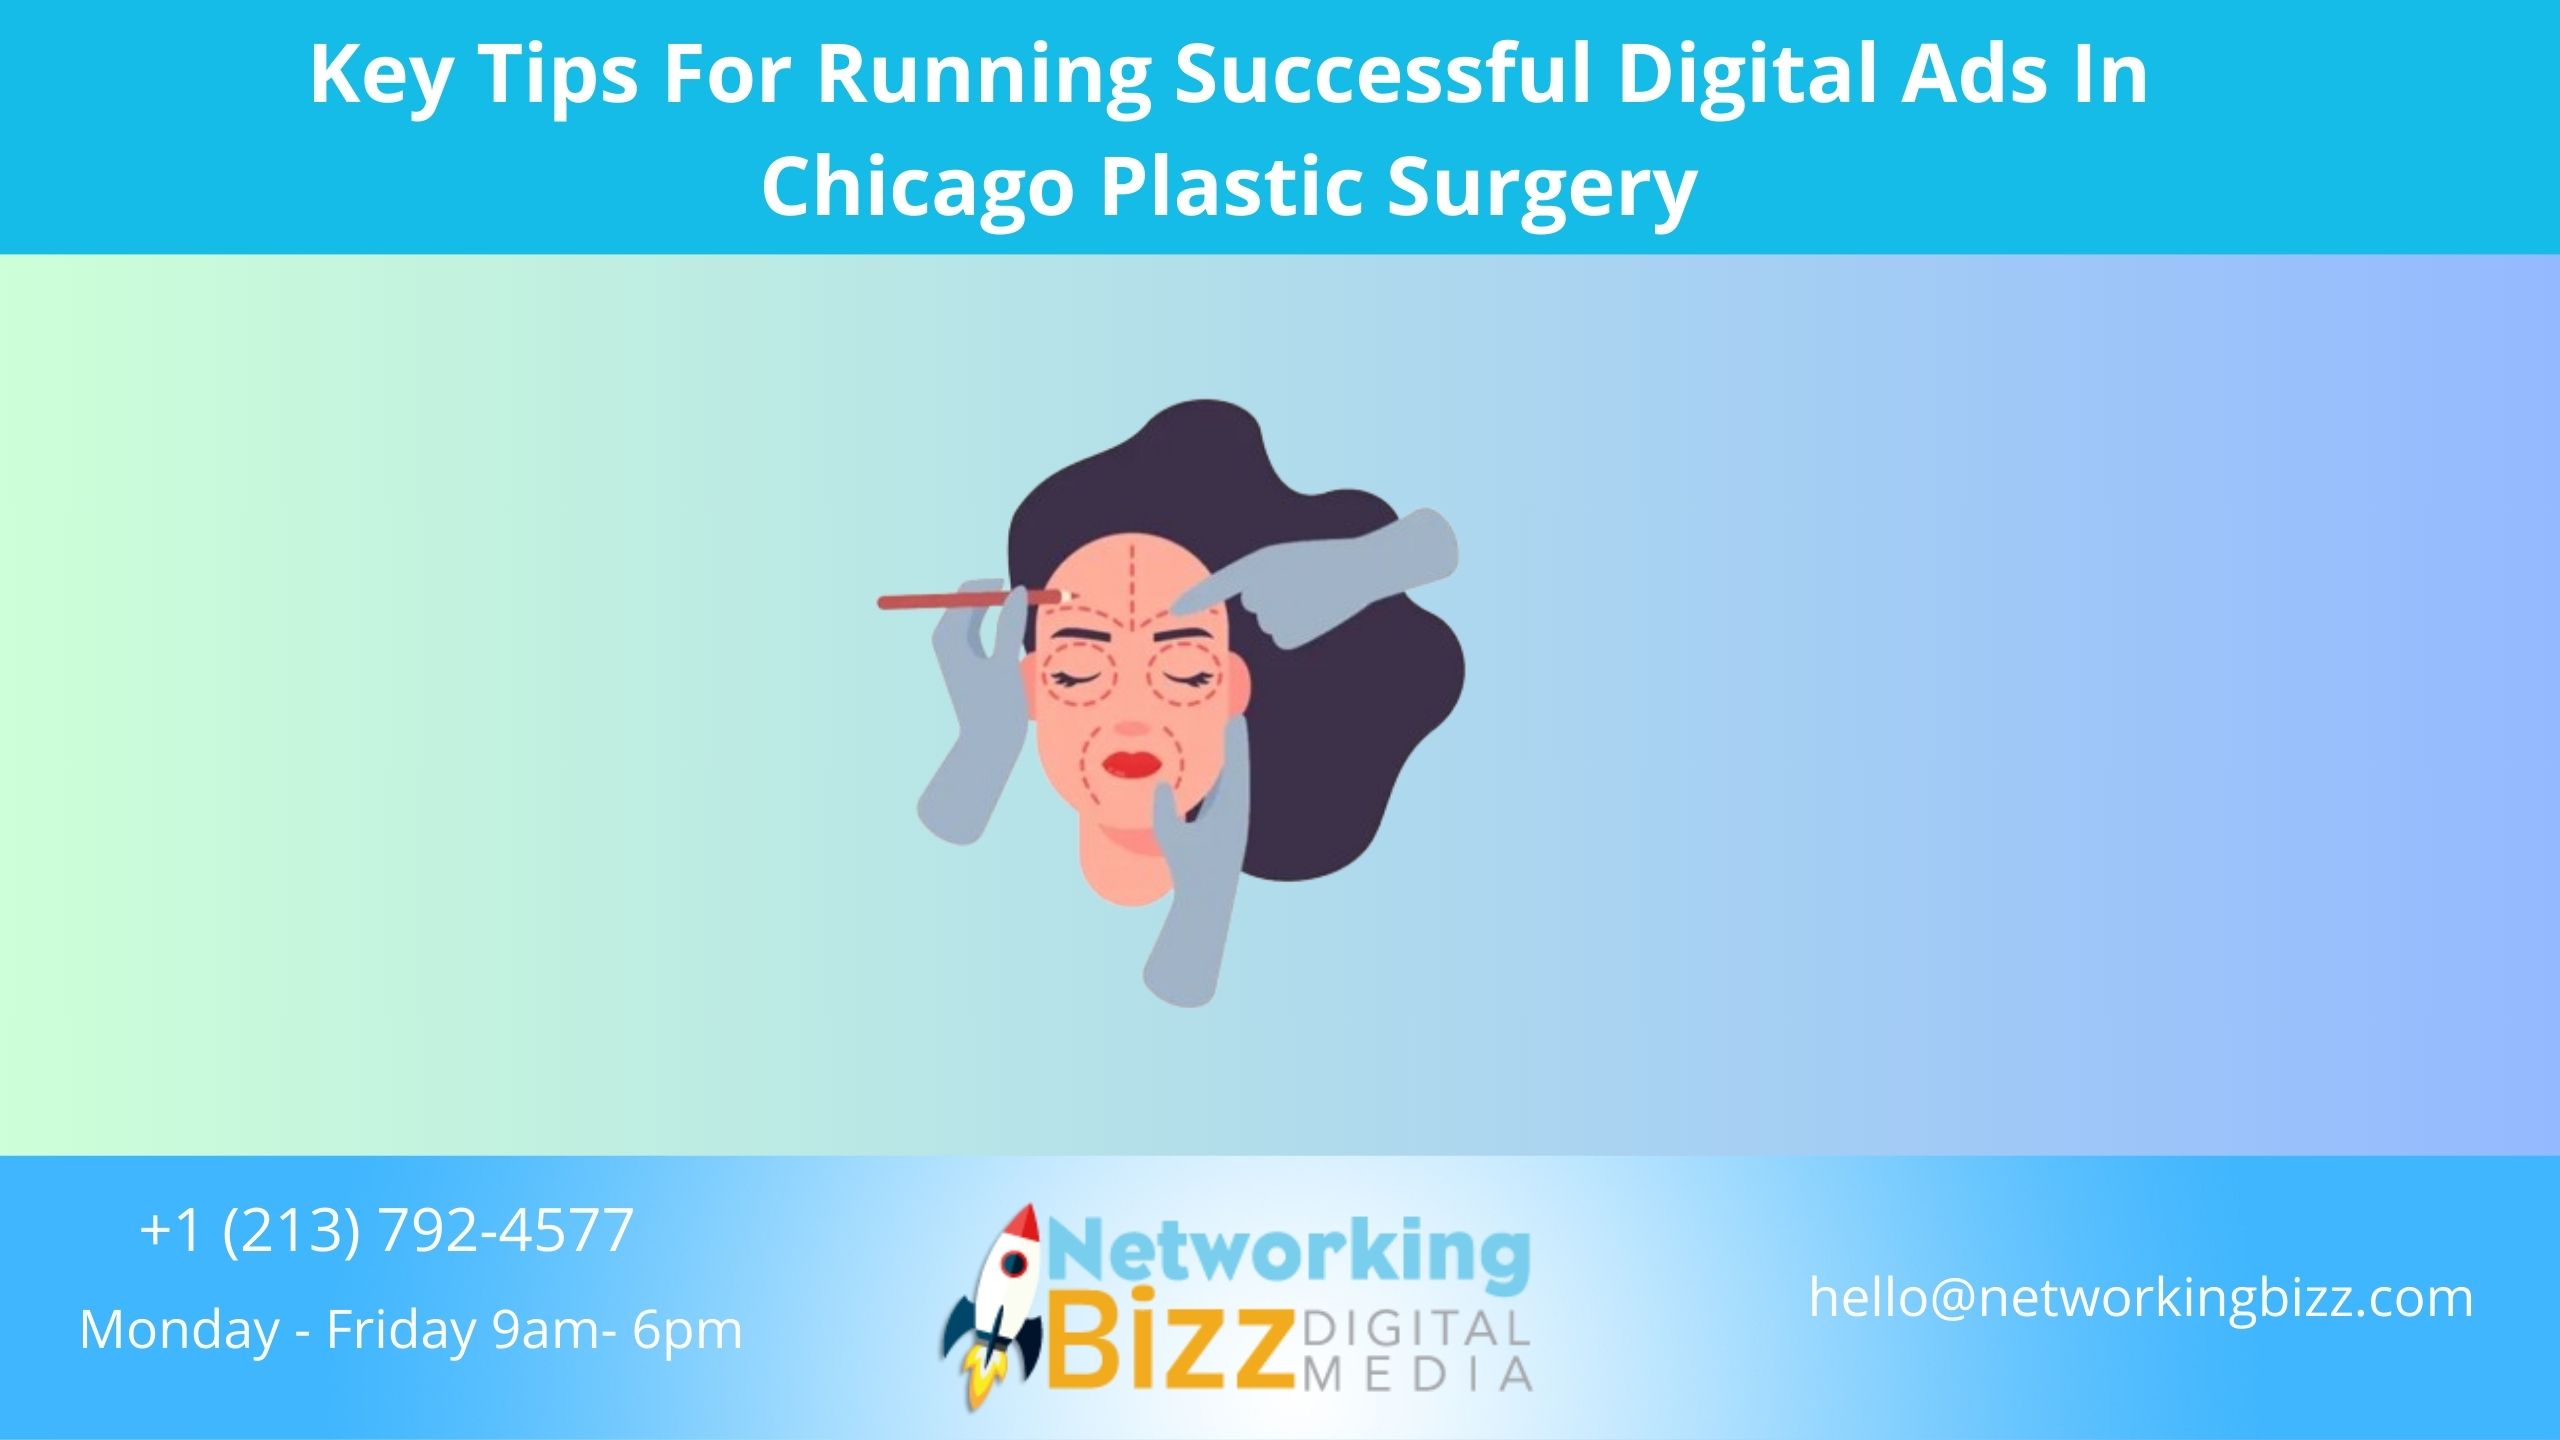 Key Tips For Running Successful Digital Ads In Chicago Plastic Surgery